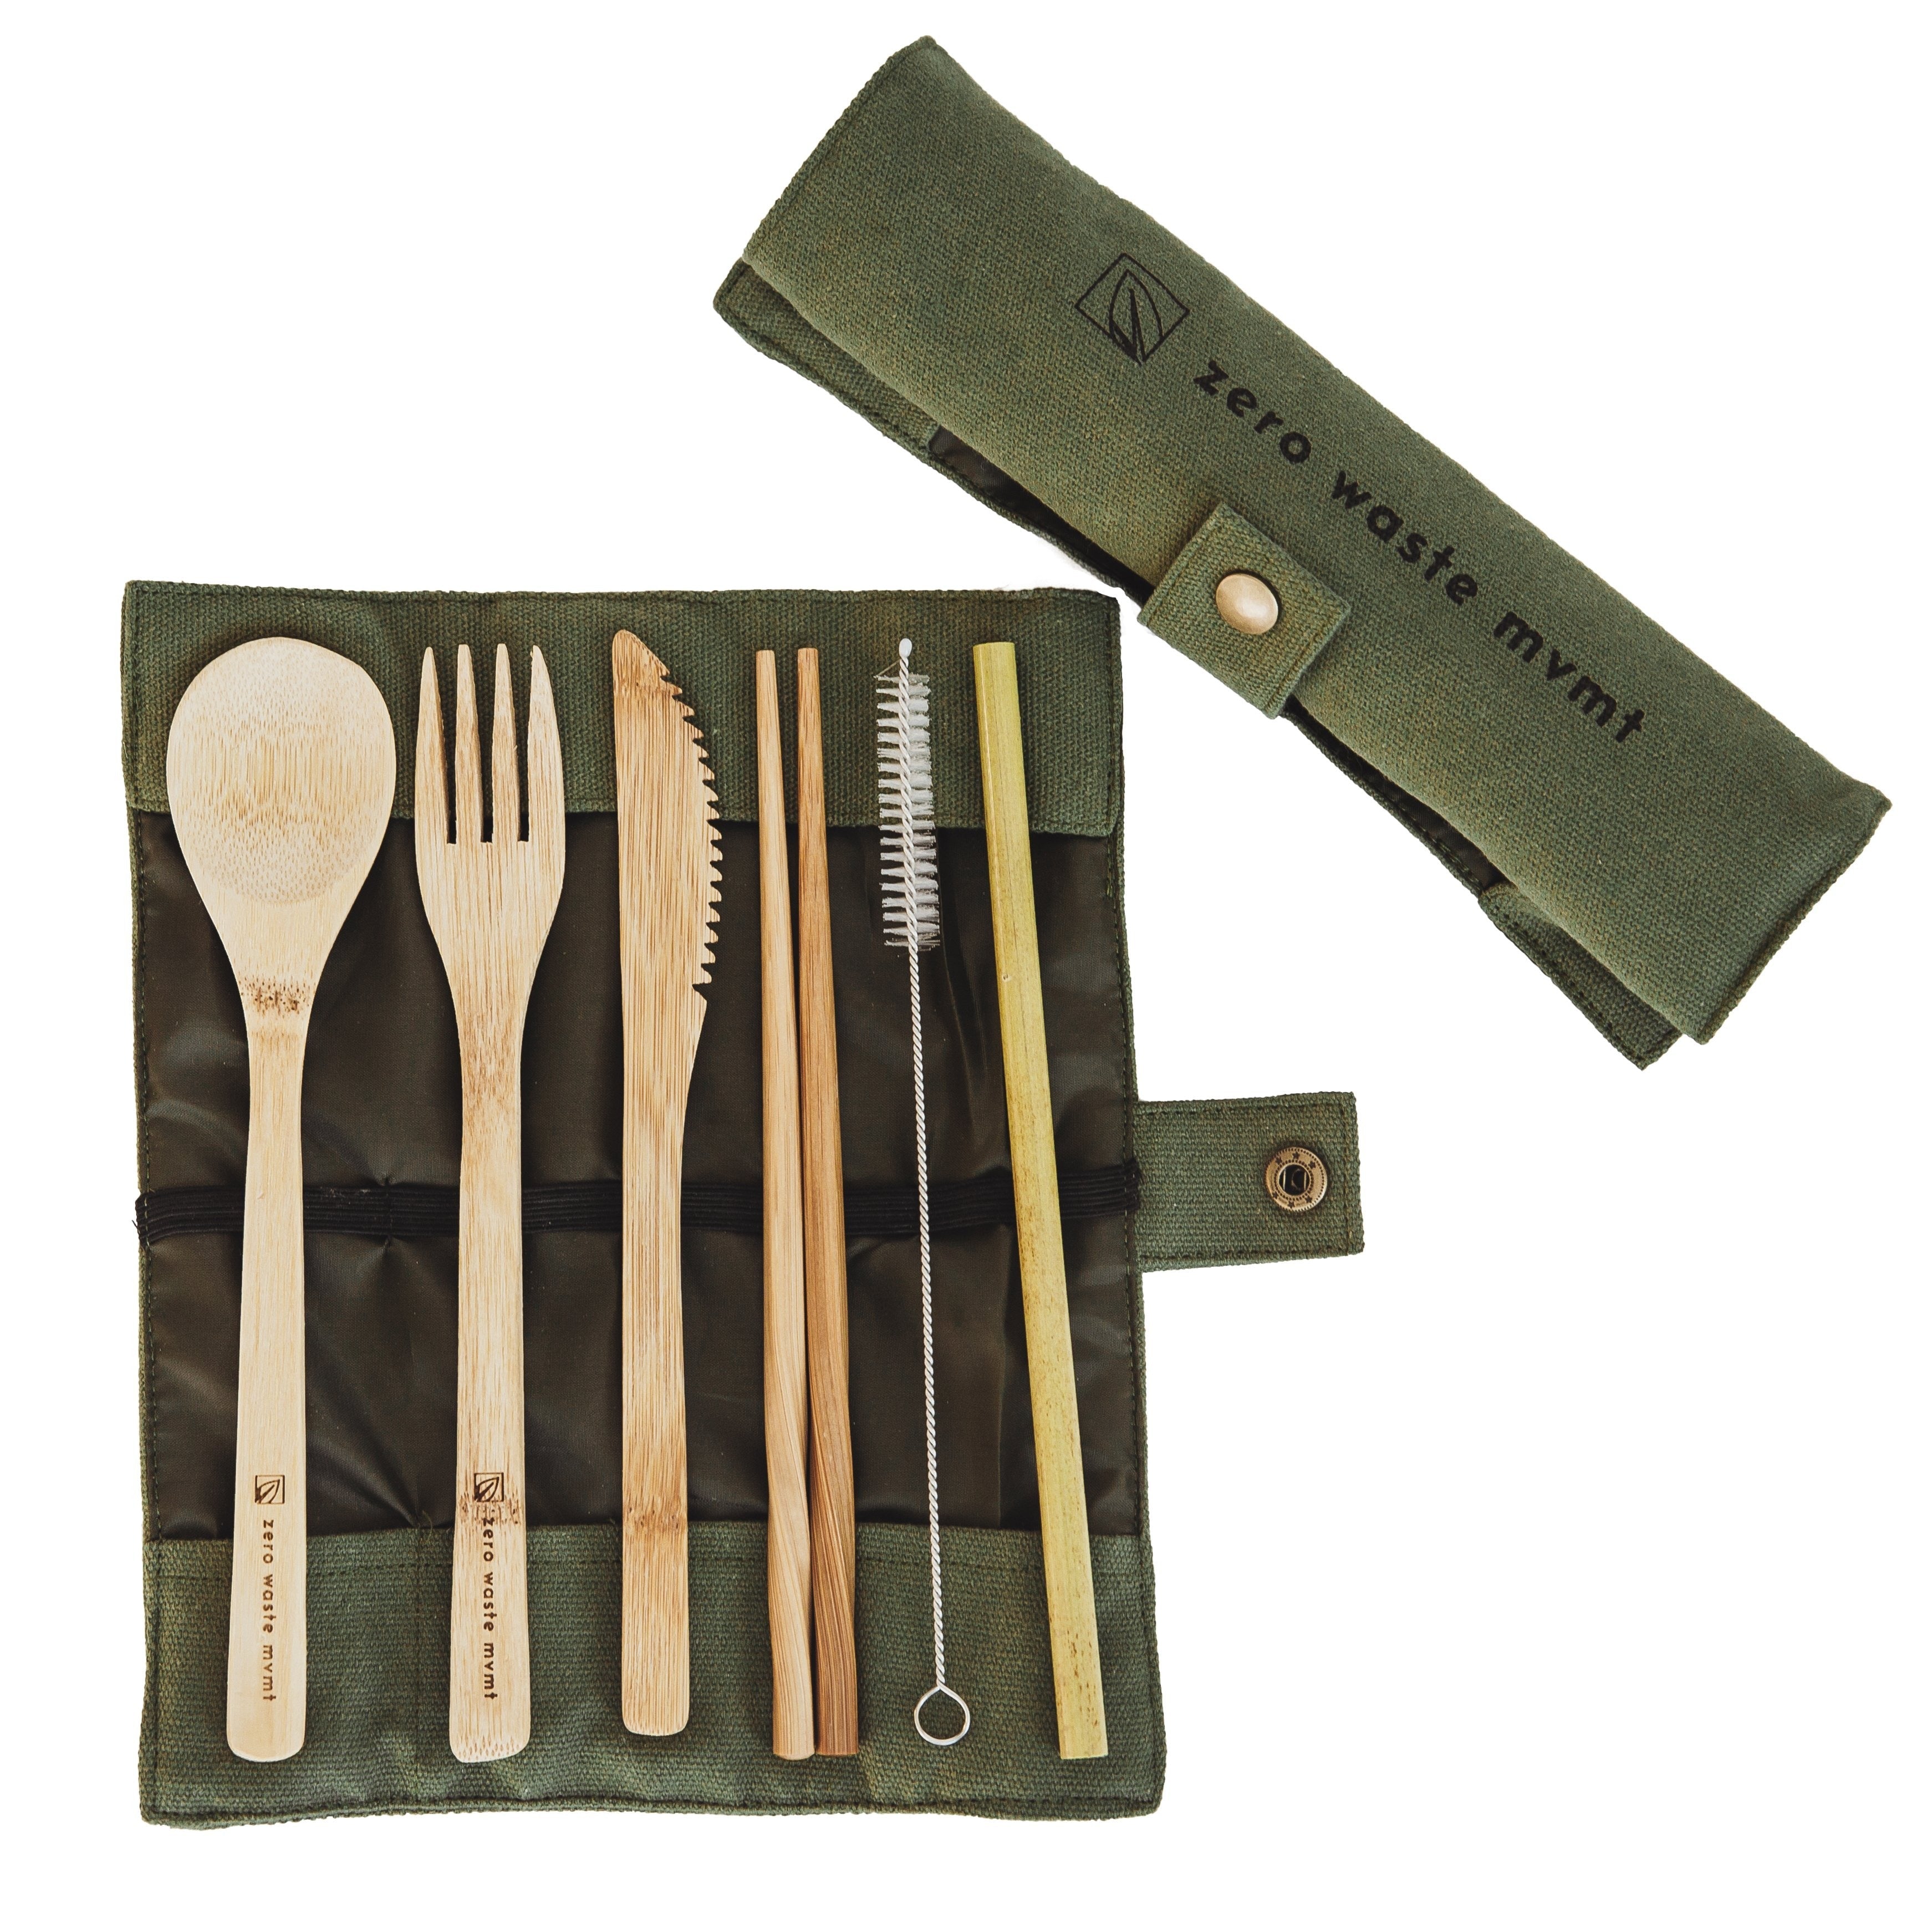 Zero Waste MVMT | Travel Bamboo Utensil Set With Spoon, Fork, Knife, Chopsticks, Straw, & Cleaning Brush, Camping Cookware, Wowe, Defiance Outdoor Gear Co.